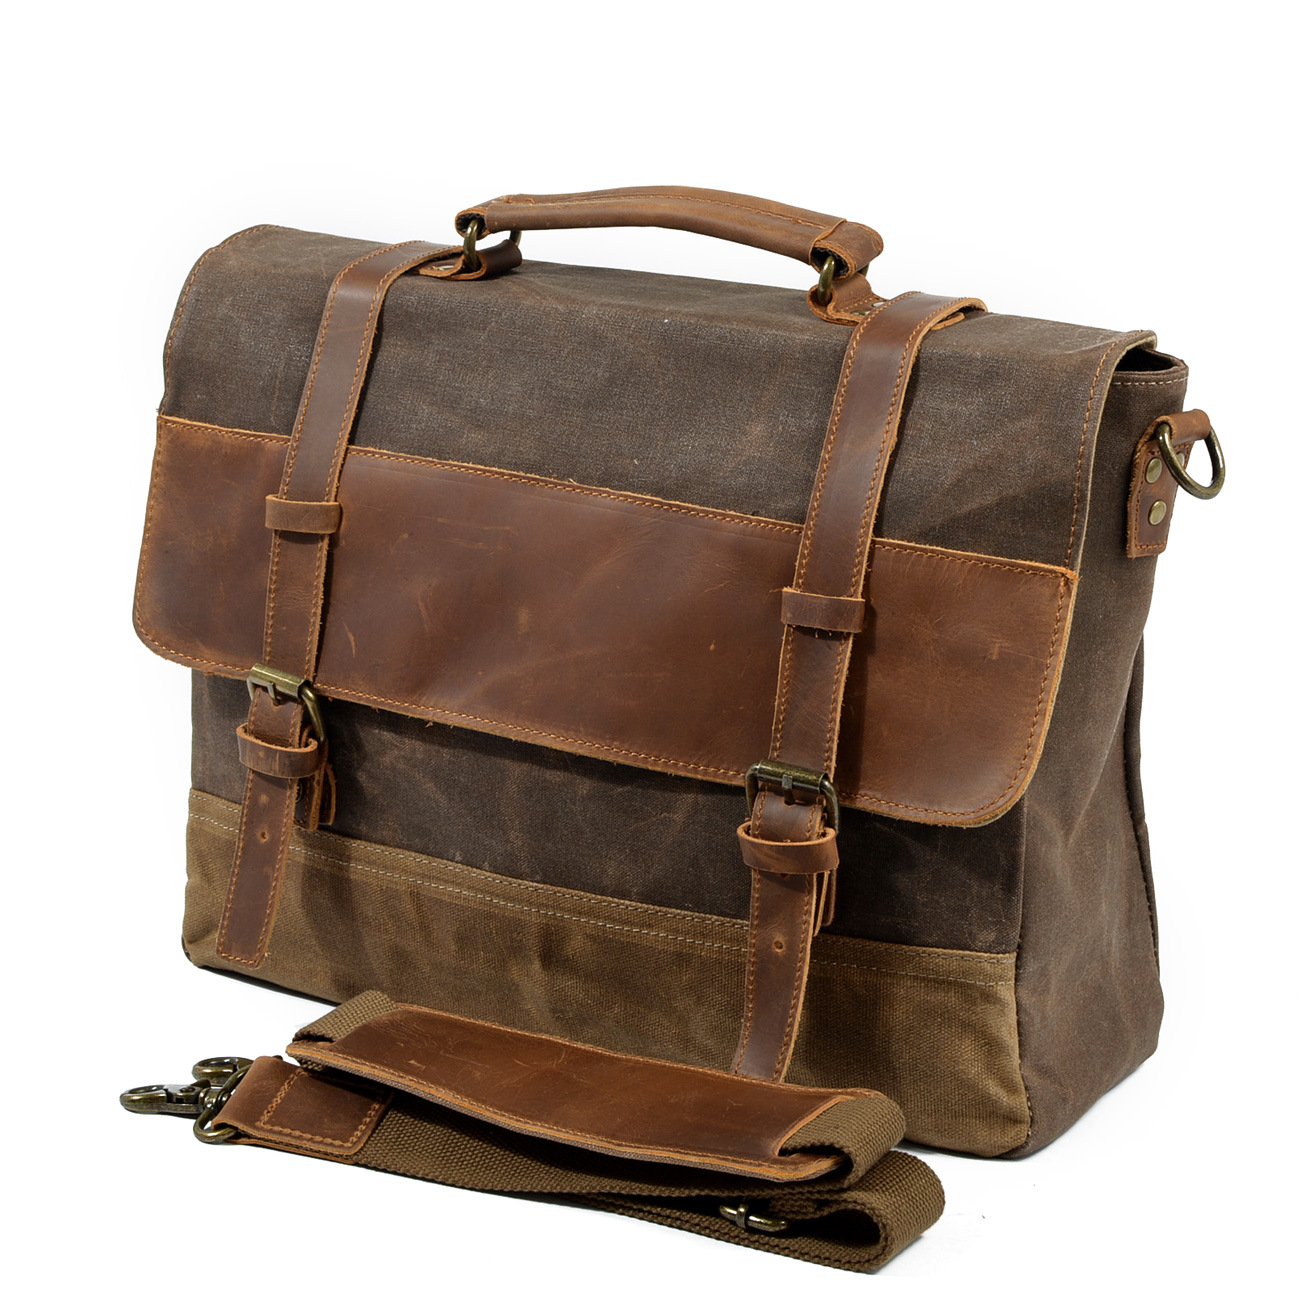 Mass Classtic Leather Business Bag And Exporter Contact Email